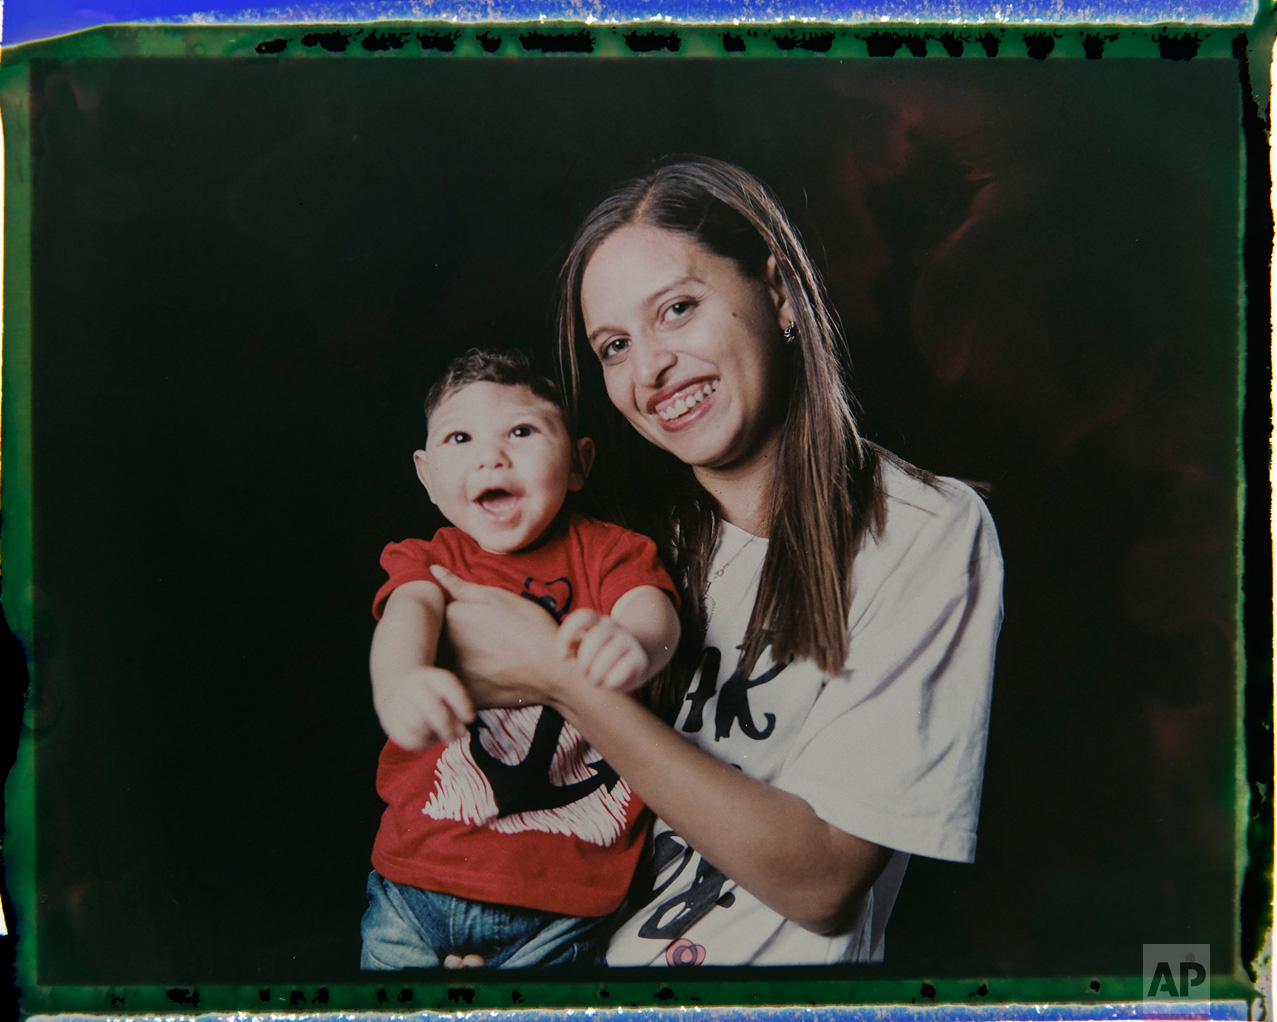  In this Sept. 29, 2016 photo made from a negative recovered from instant film, Daniele Ferreira dos Santos holds her son Juan Pedro, who was born with microcephaly, one of many serious medical problems that can be caused by congenital Zika syndrome,